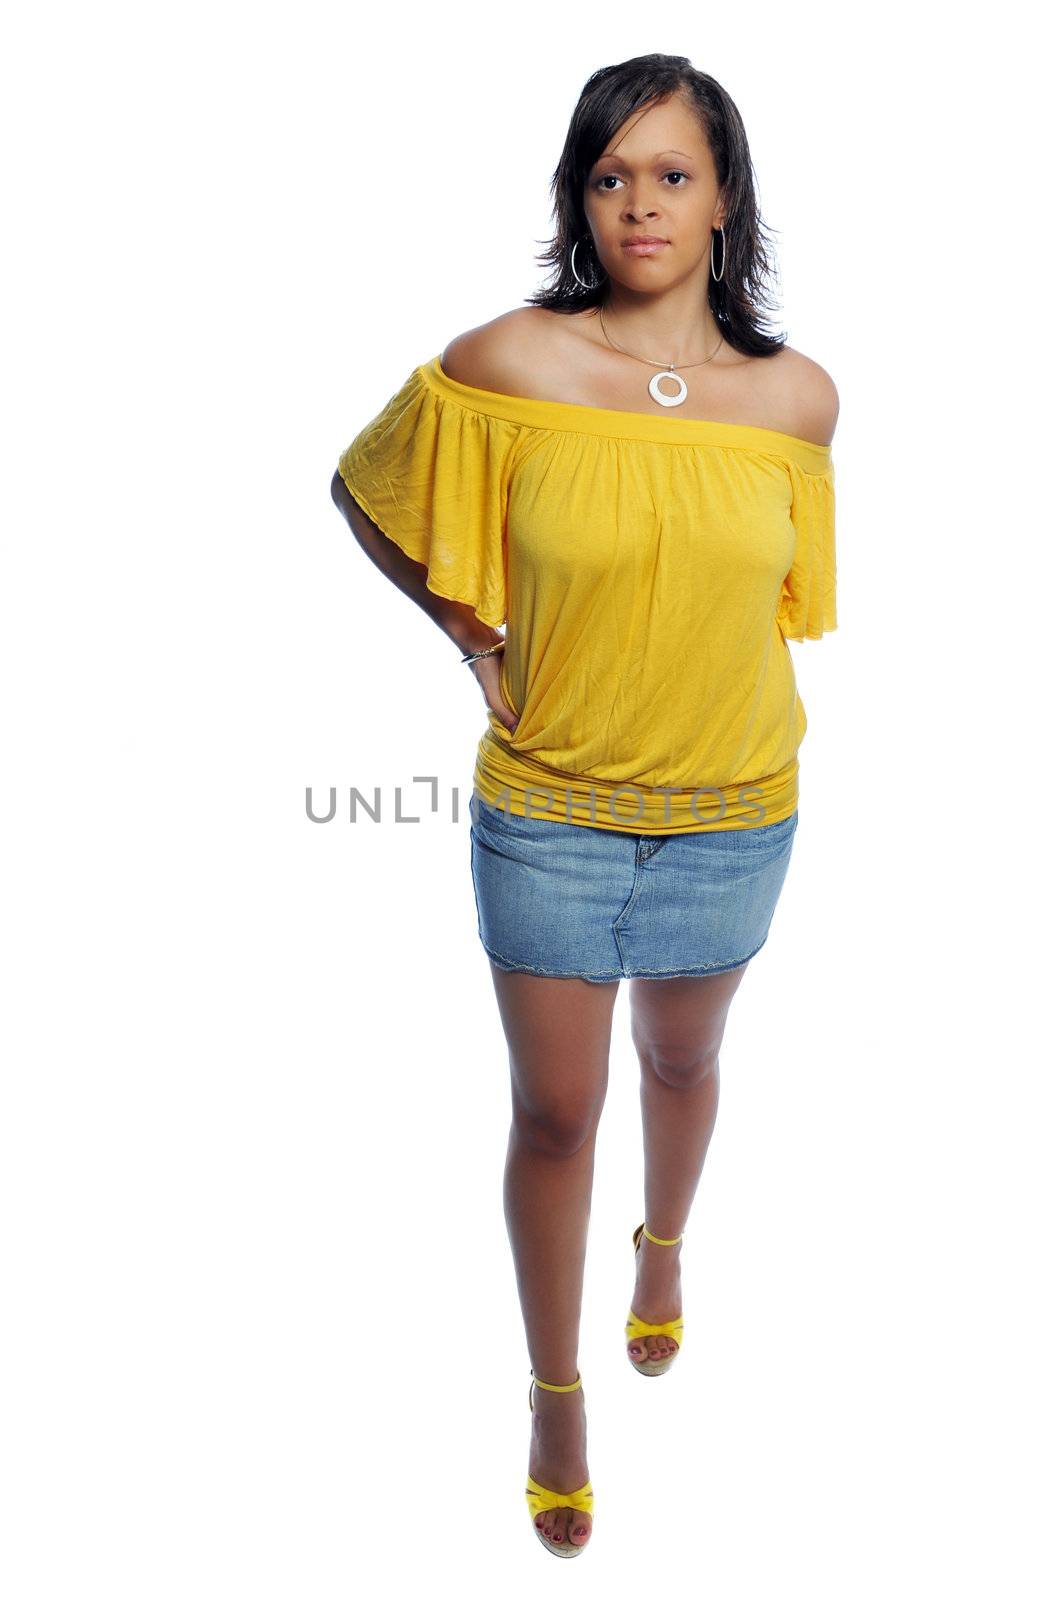 Attractive young woman in a yellow top and short skirt